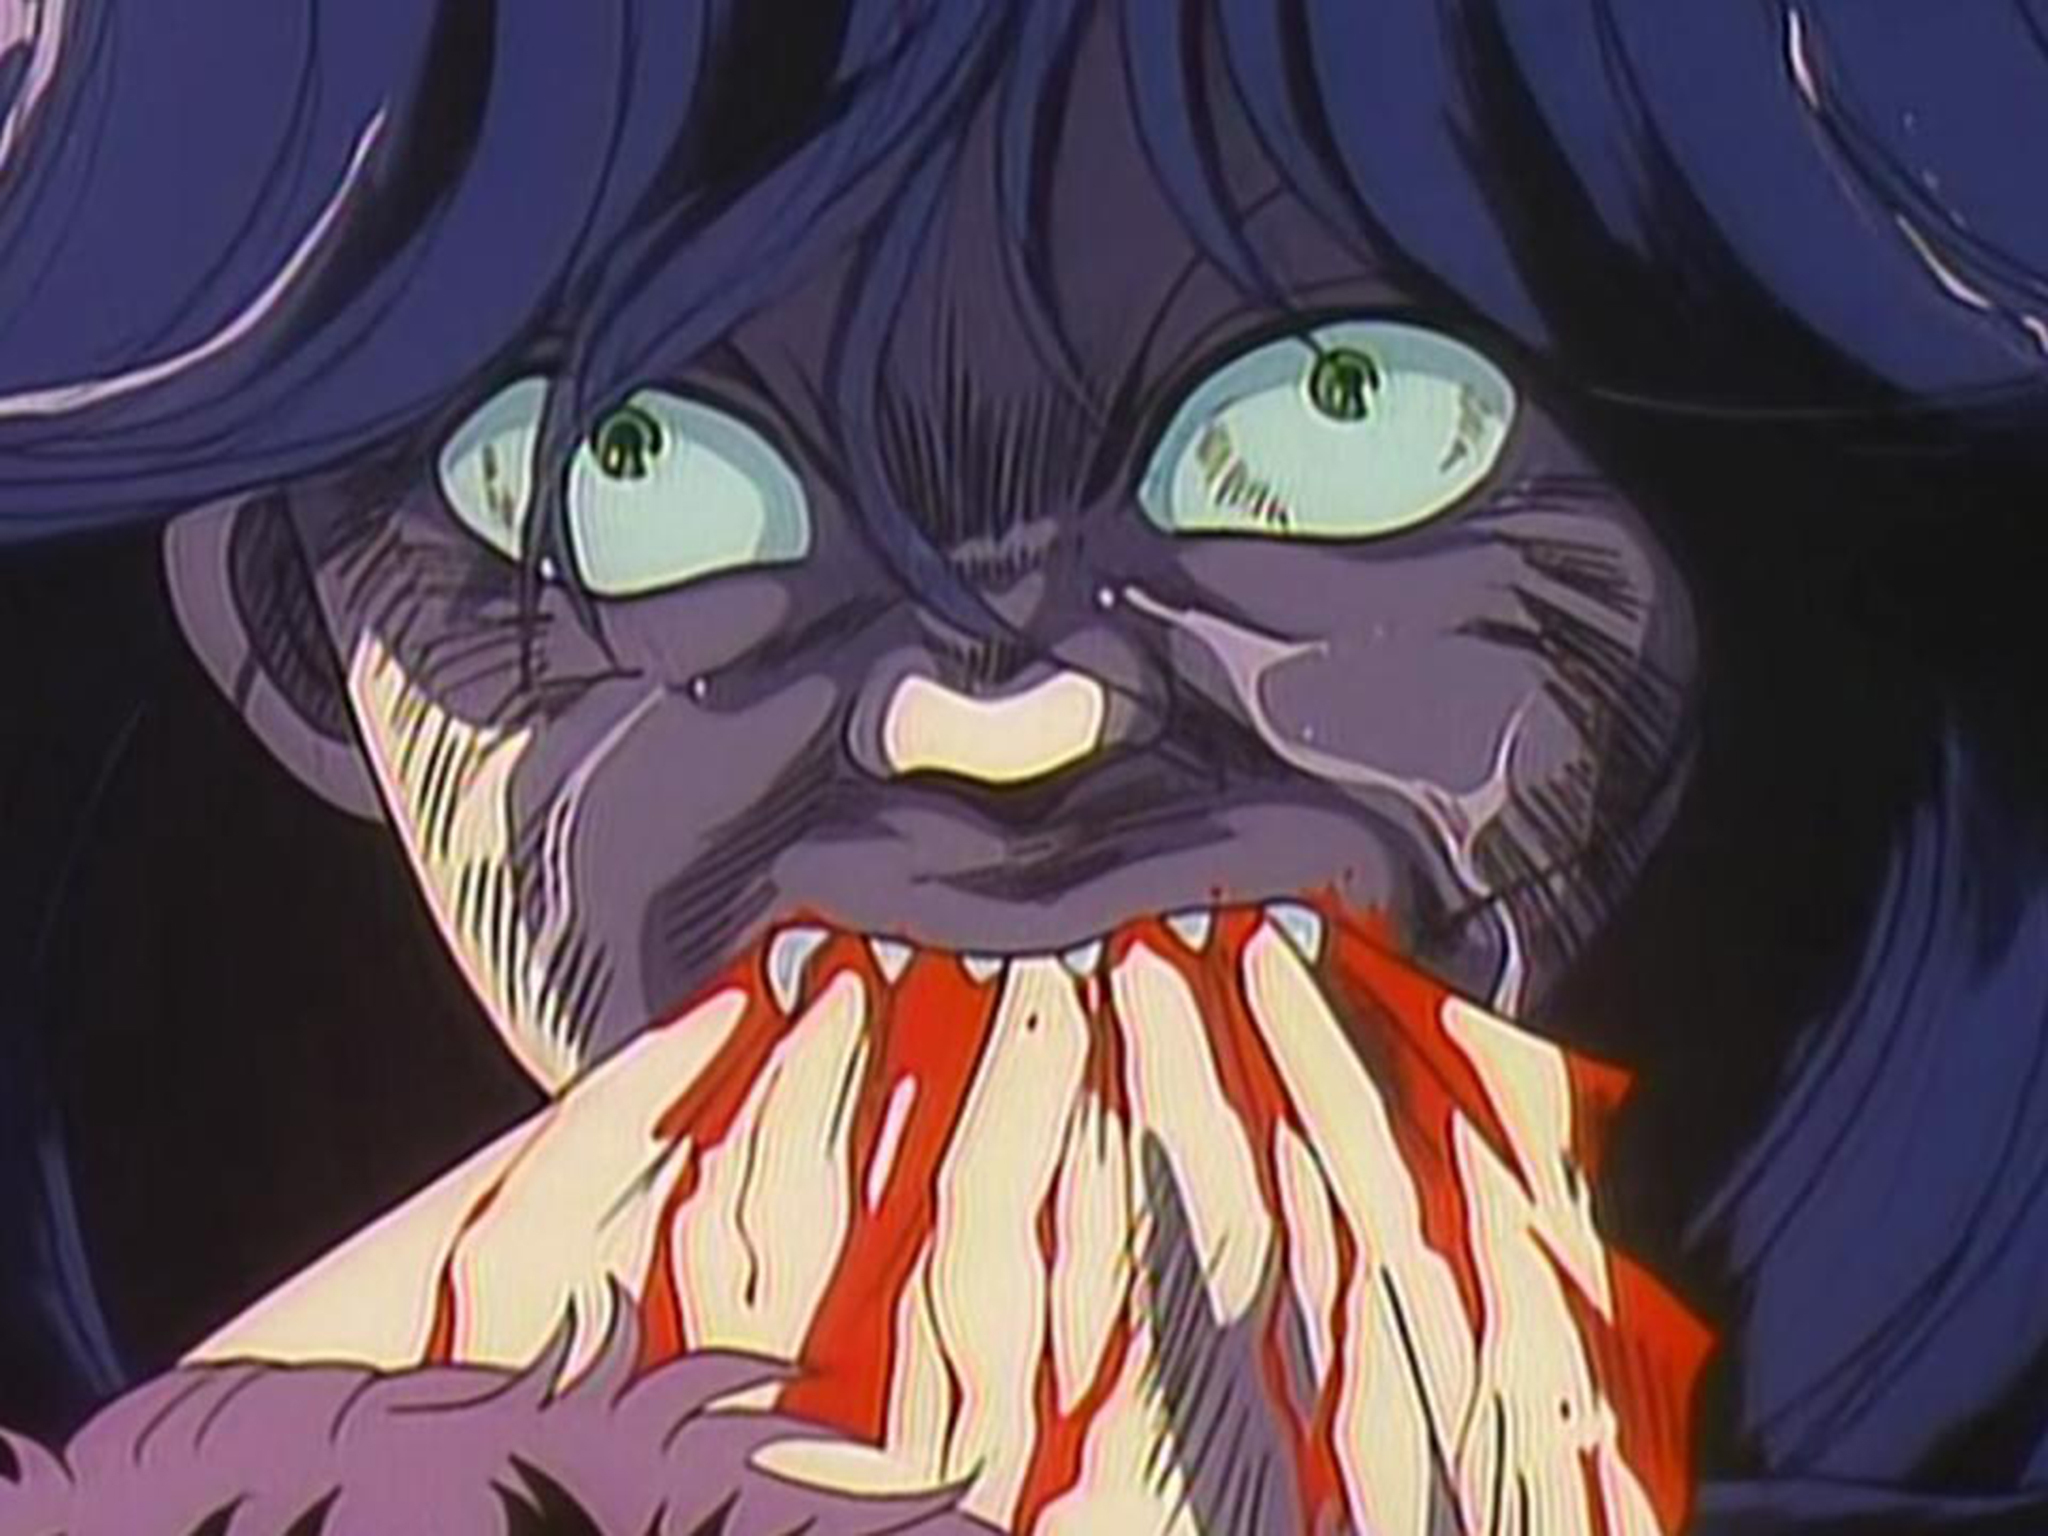 The 13 Most Horrifying Moments From Non-Horror Anime